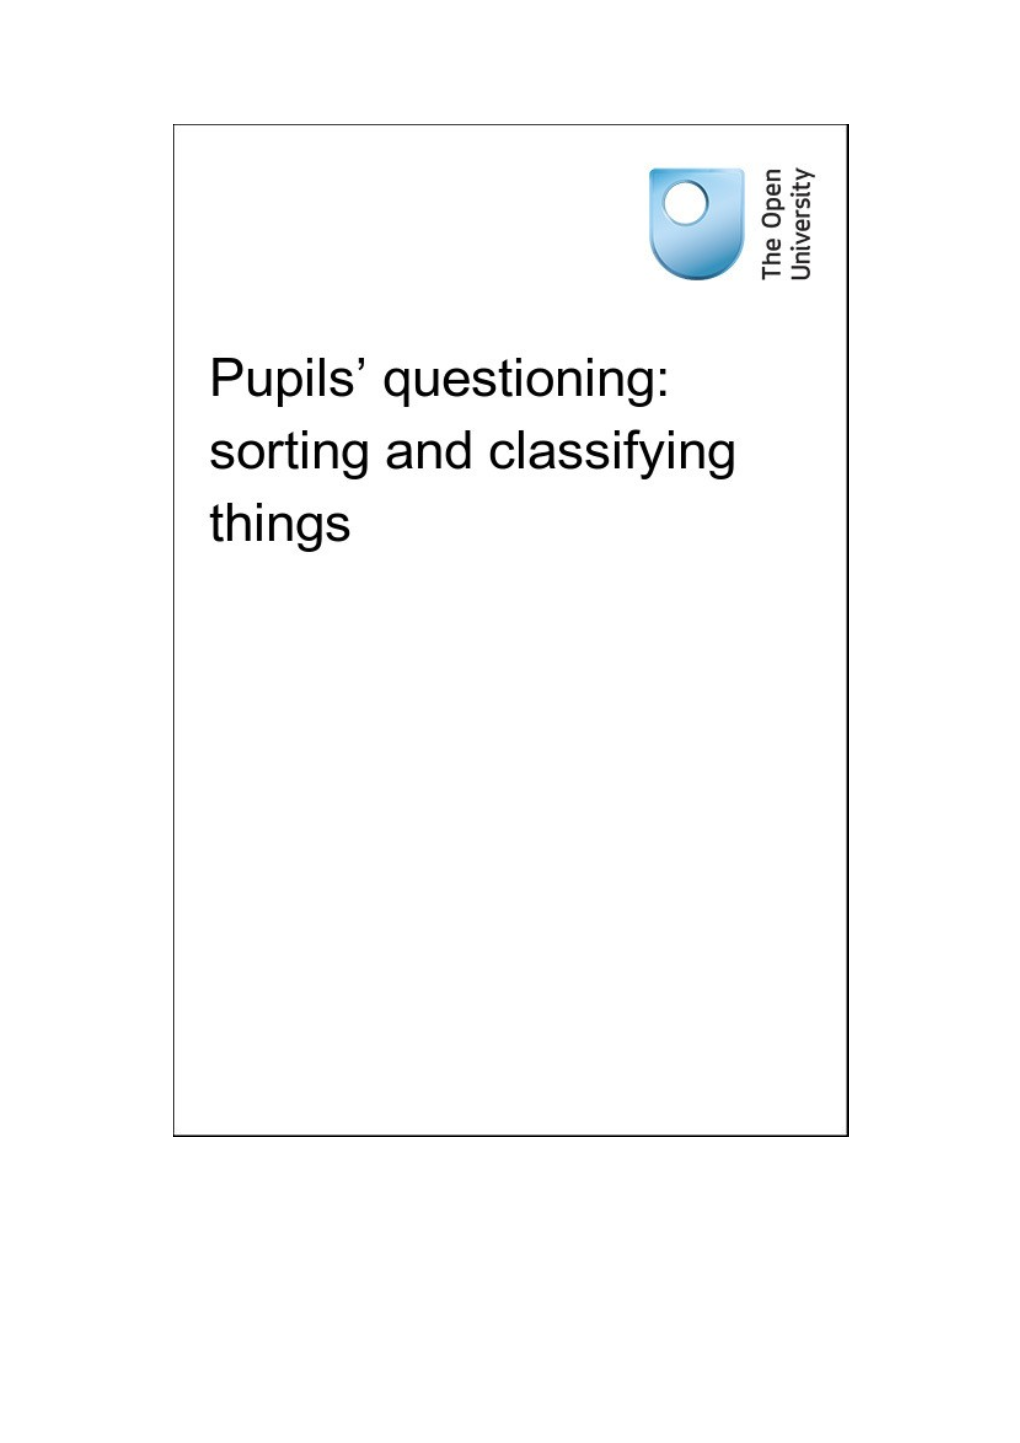 Pupils Questioning: Sorting and Classifying Things